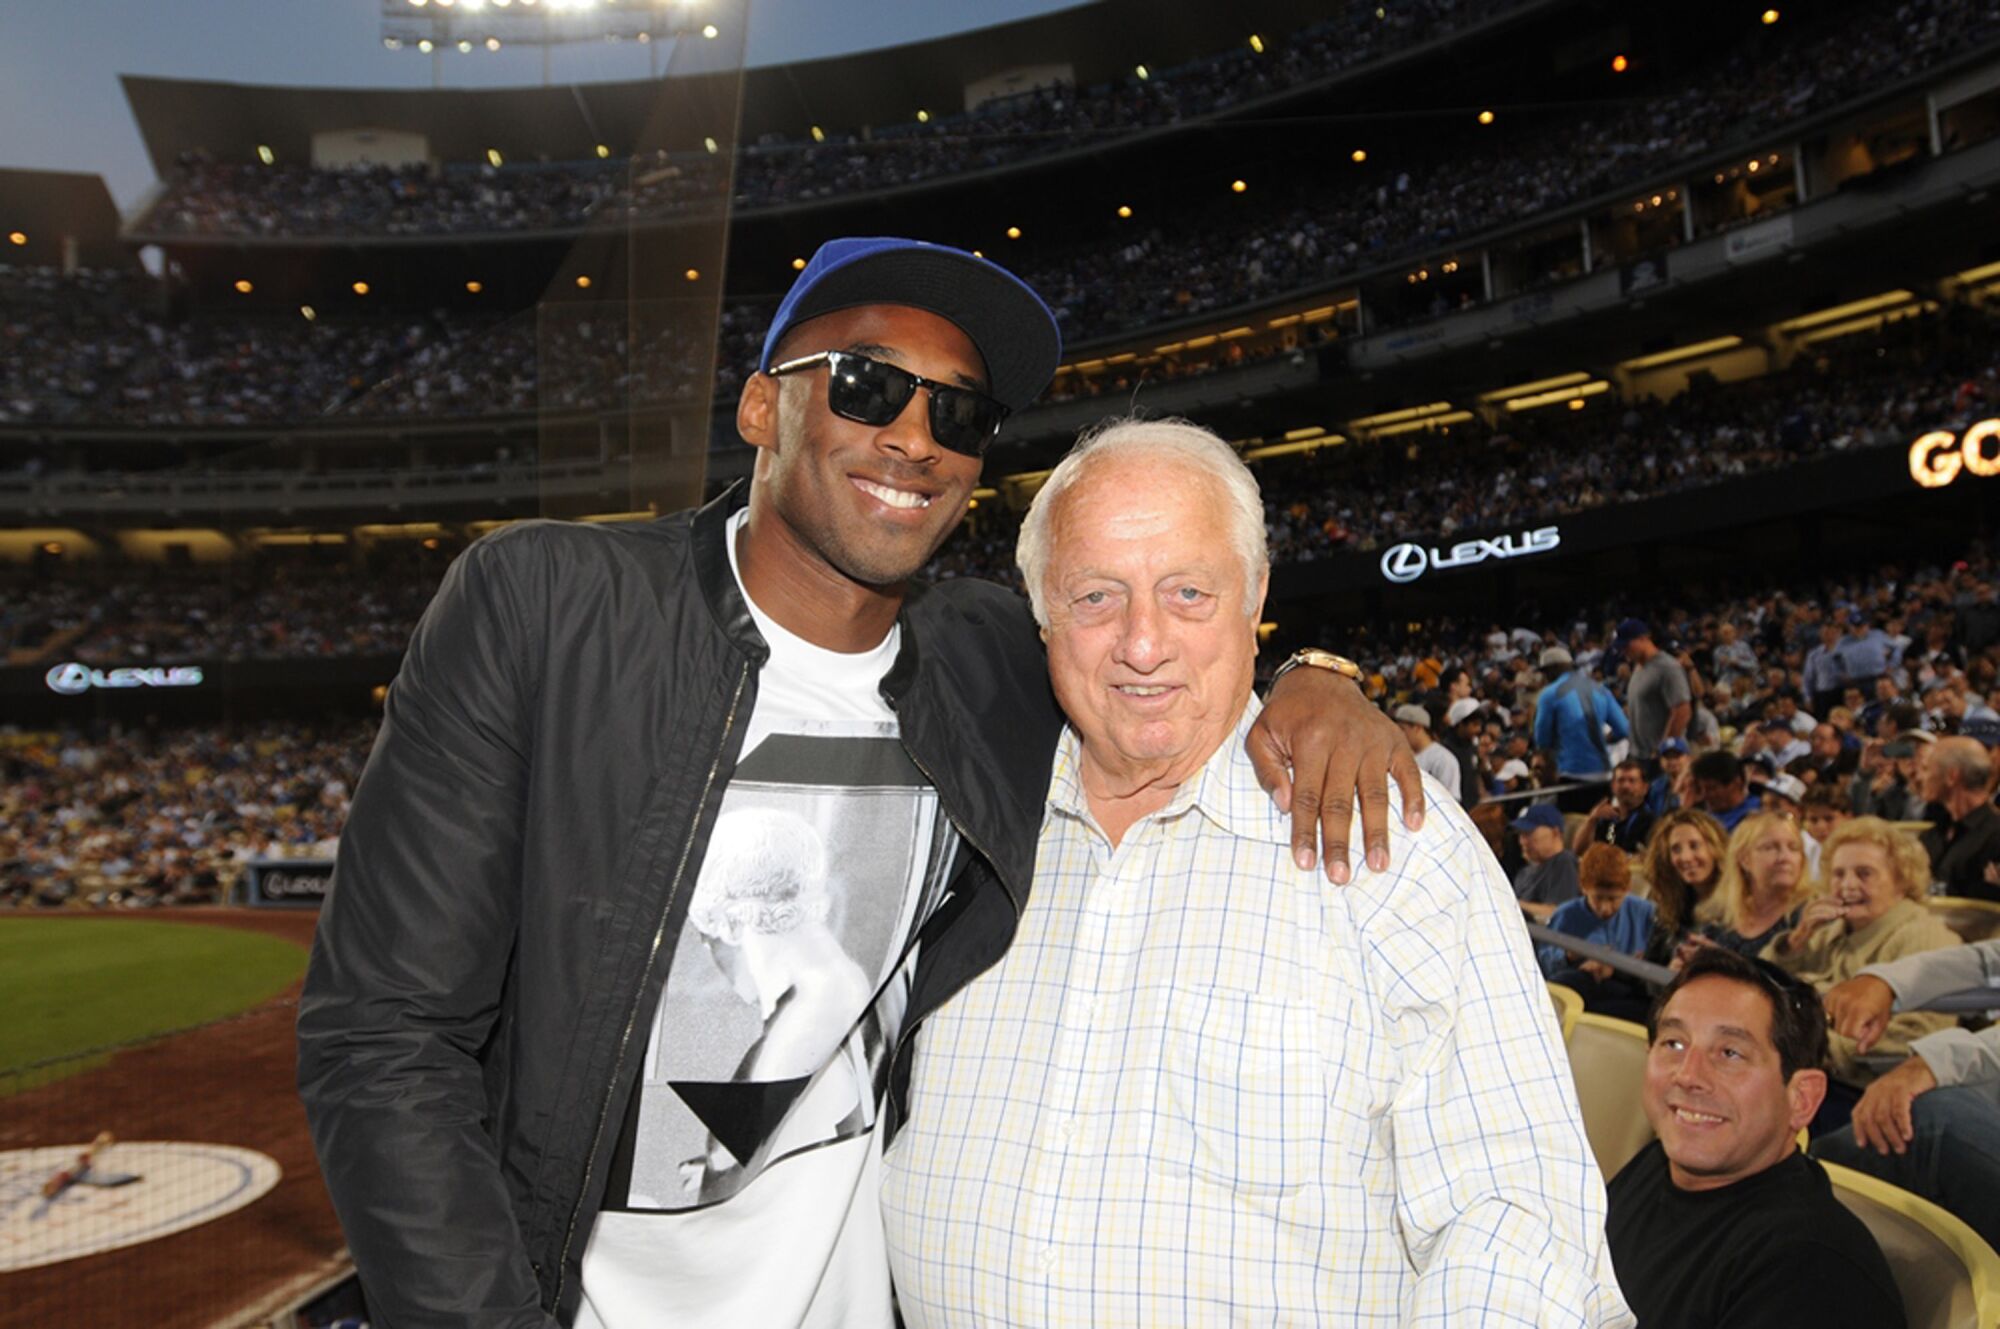 In 2013, Lakers star Kobe Bryant, left, joins Tommy Lasorda at a game between the Dodgers and the New York Yankees